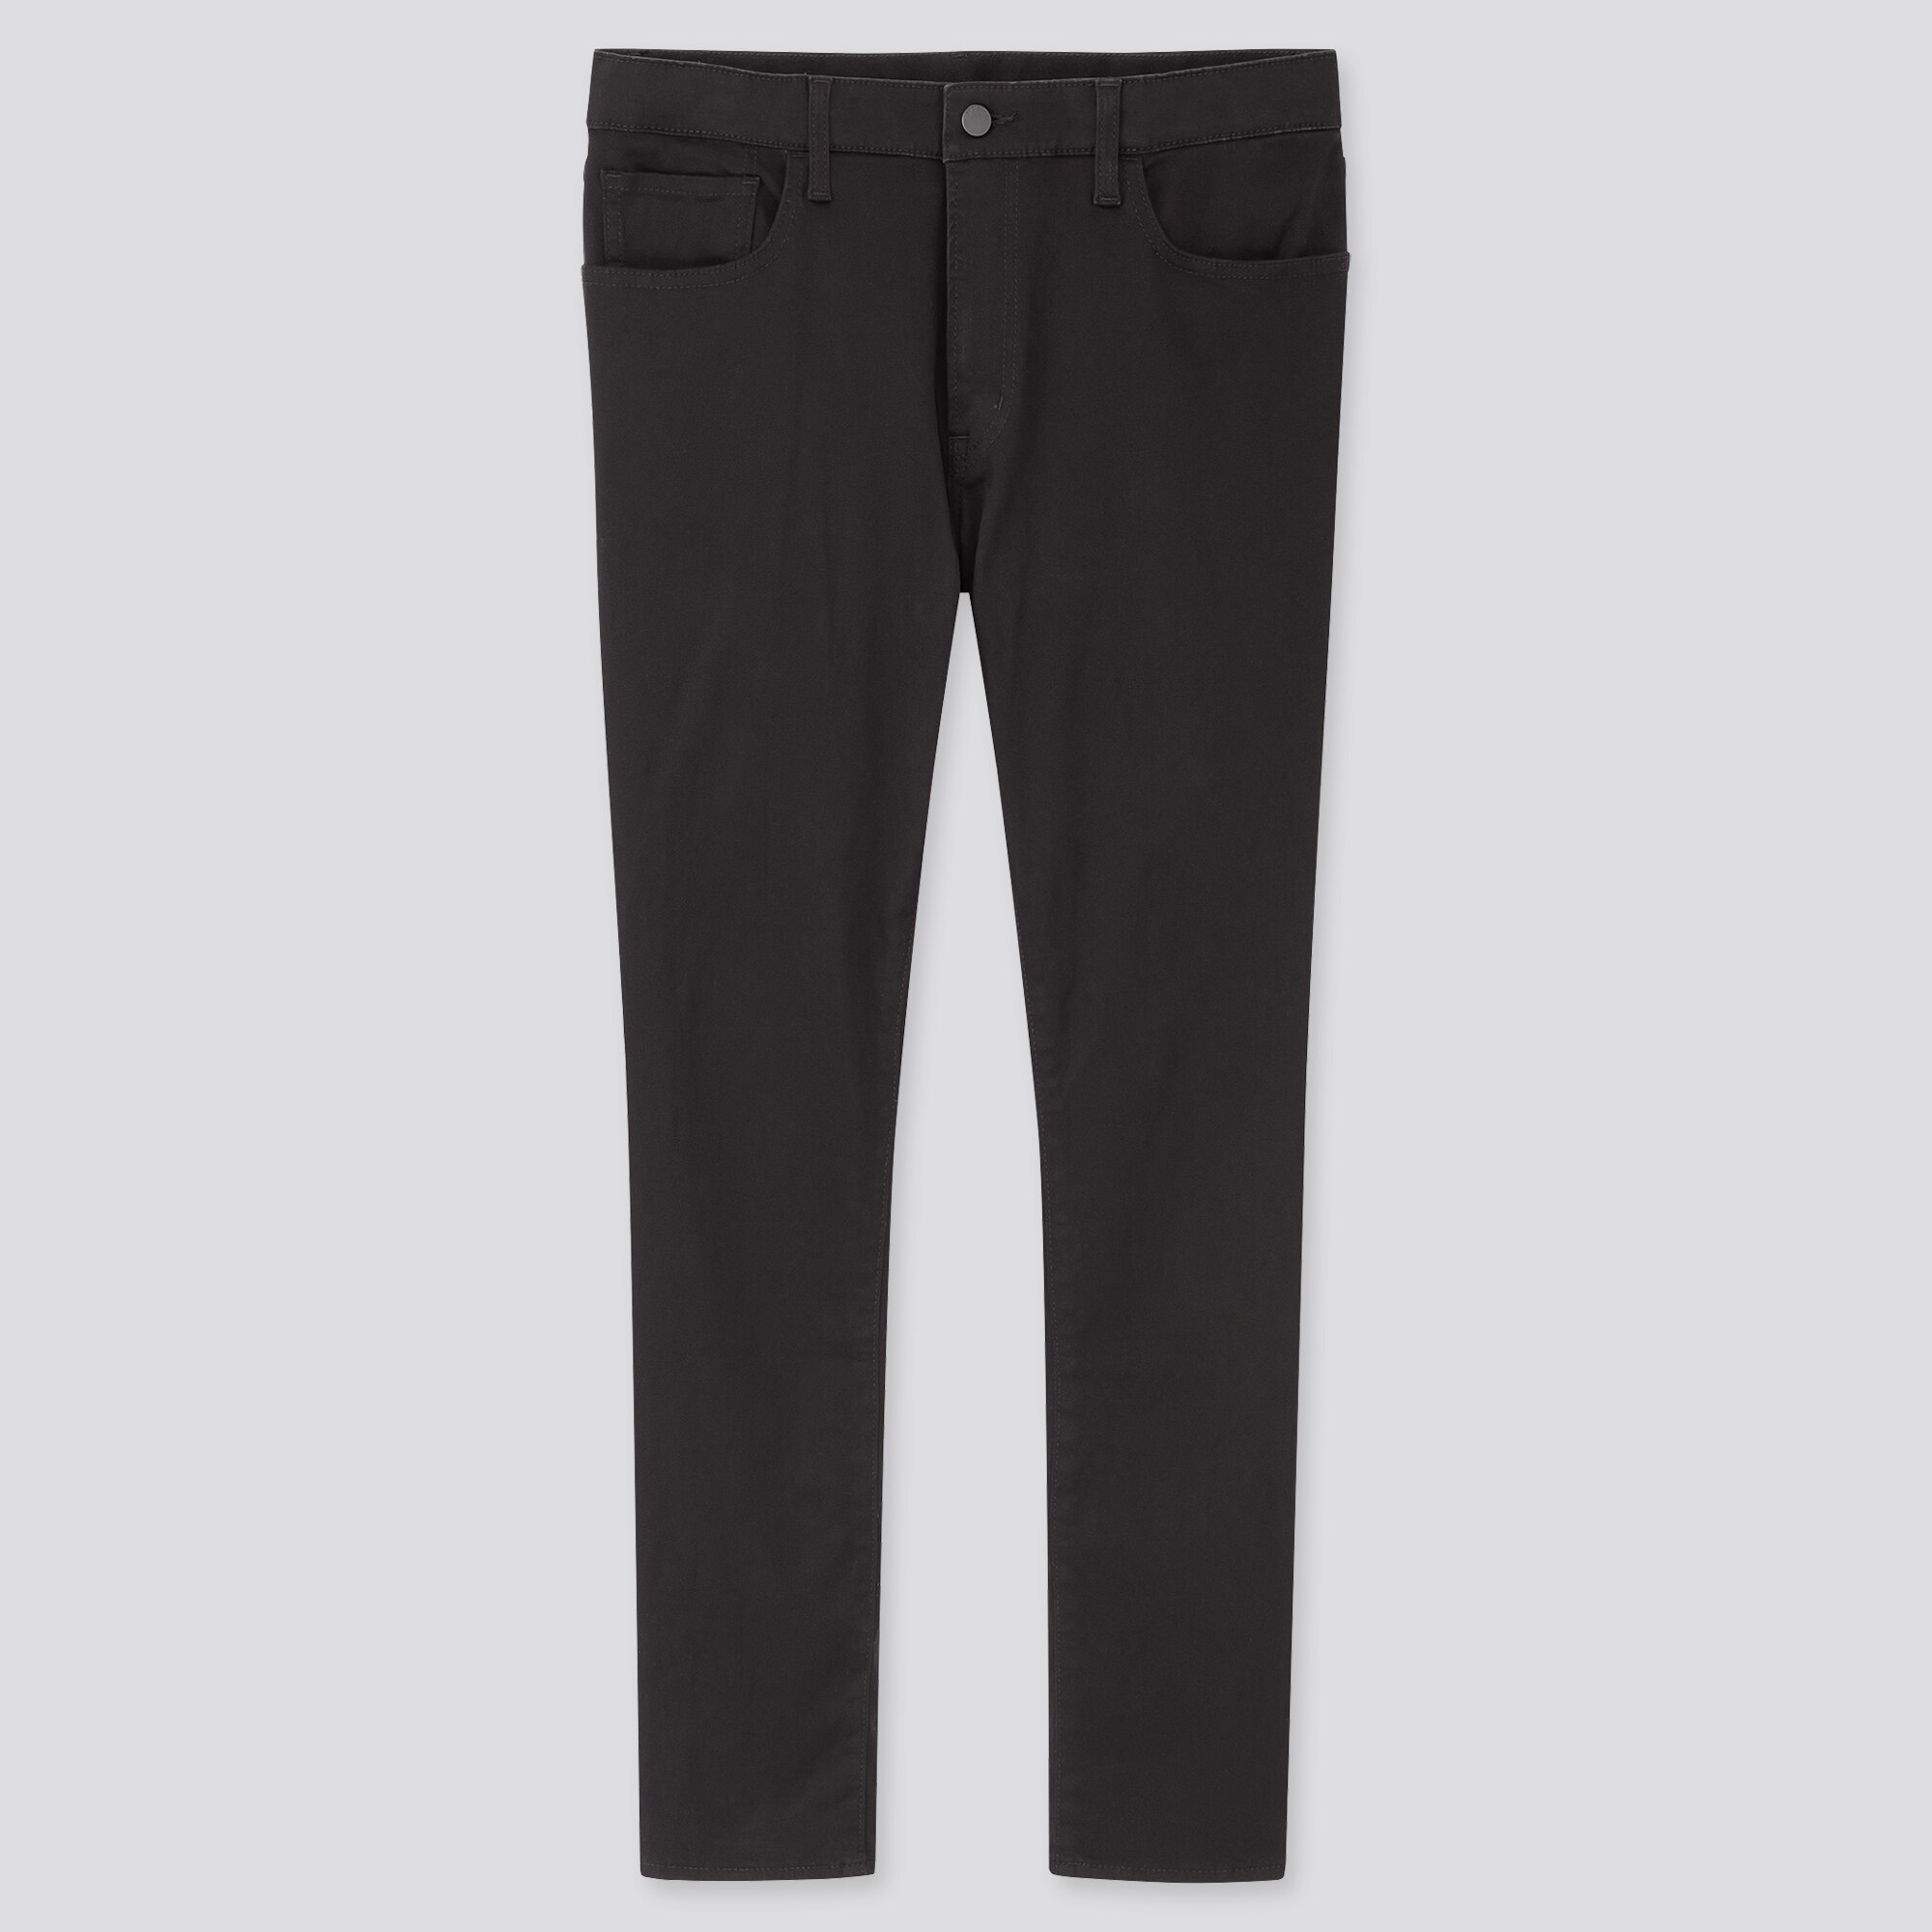 uniqlo ezy skinny fit color jeans